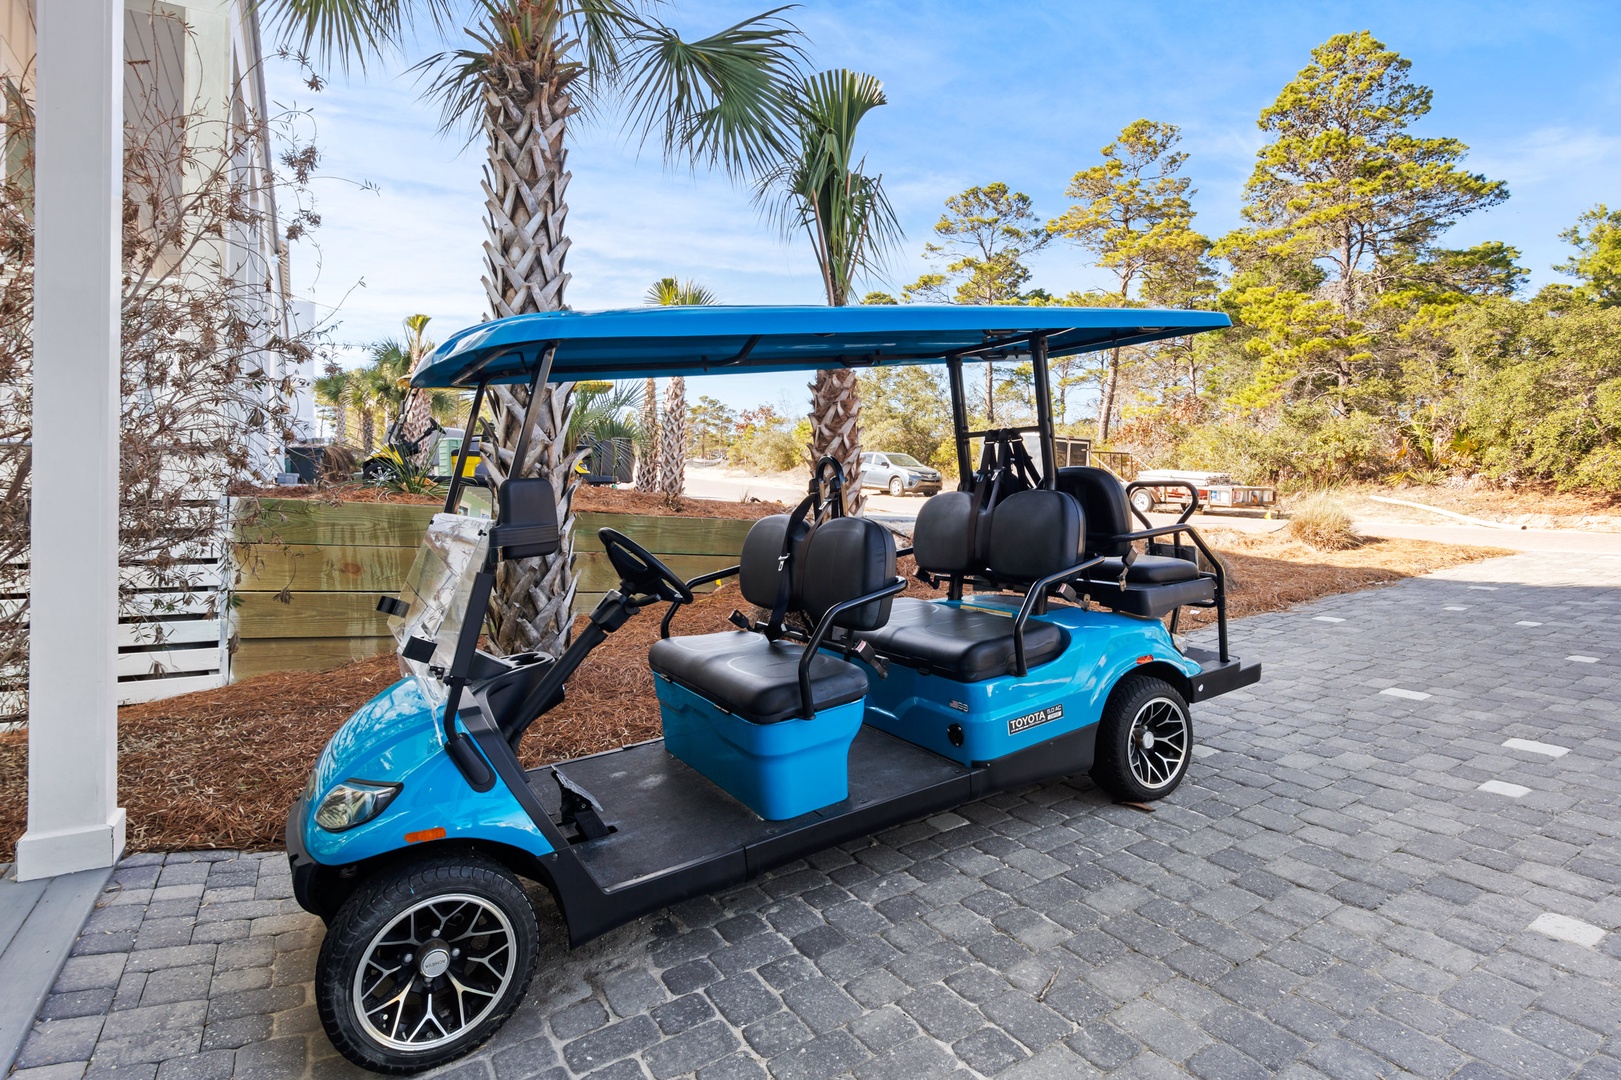 $500 weekly fee for use of the golf cart.